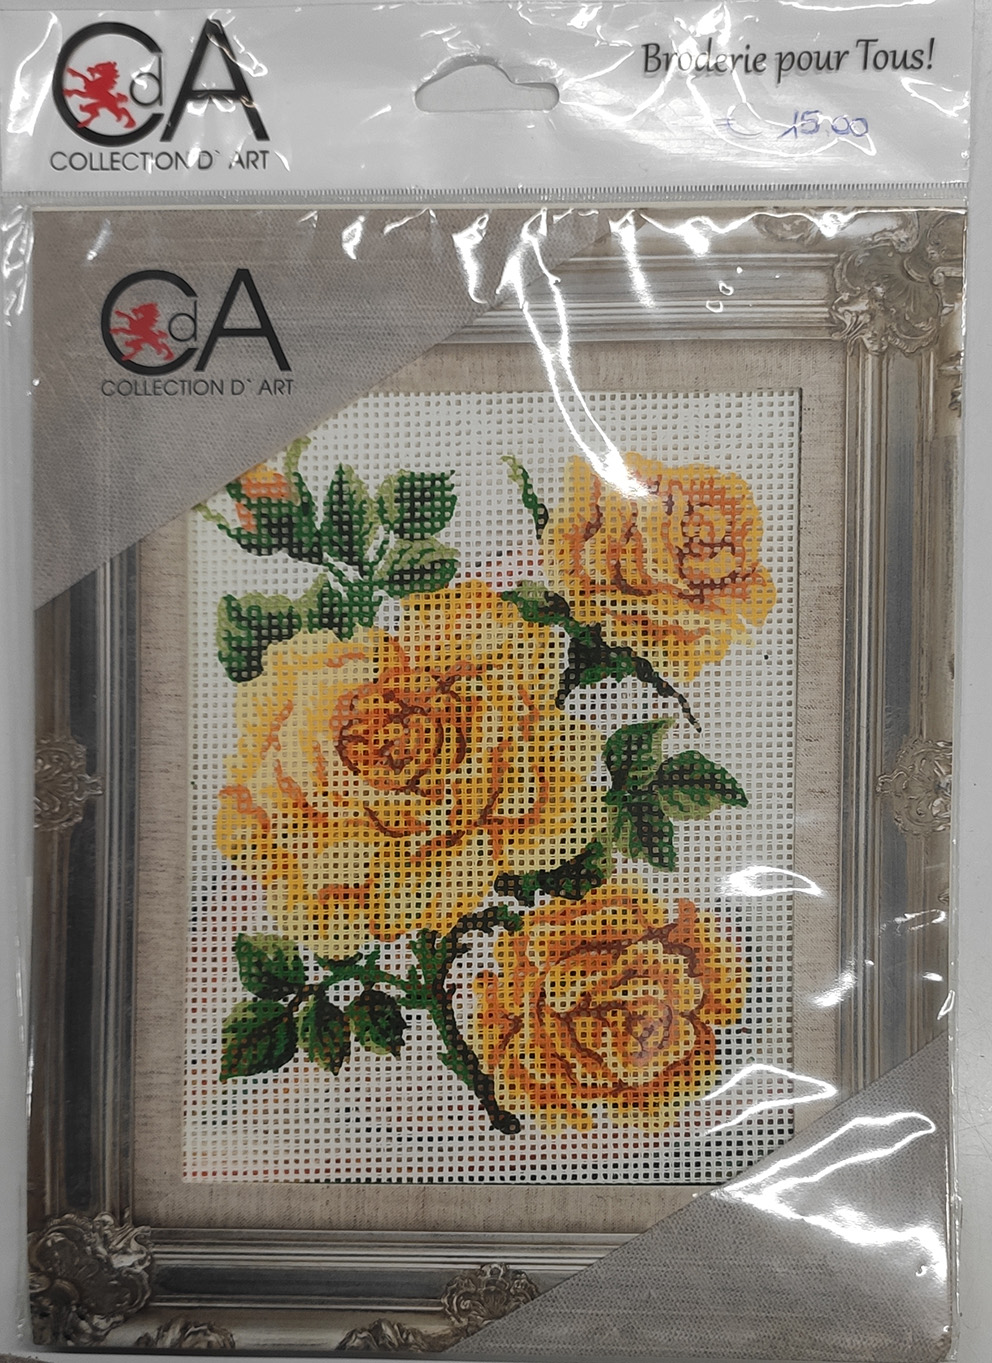 Collection d'art- immagine prestampata rose gialle